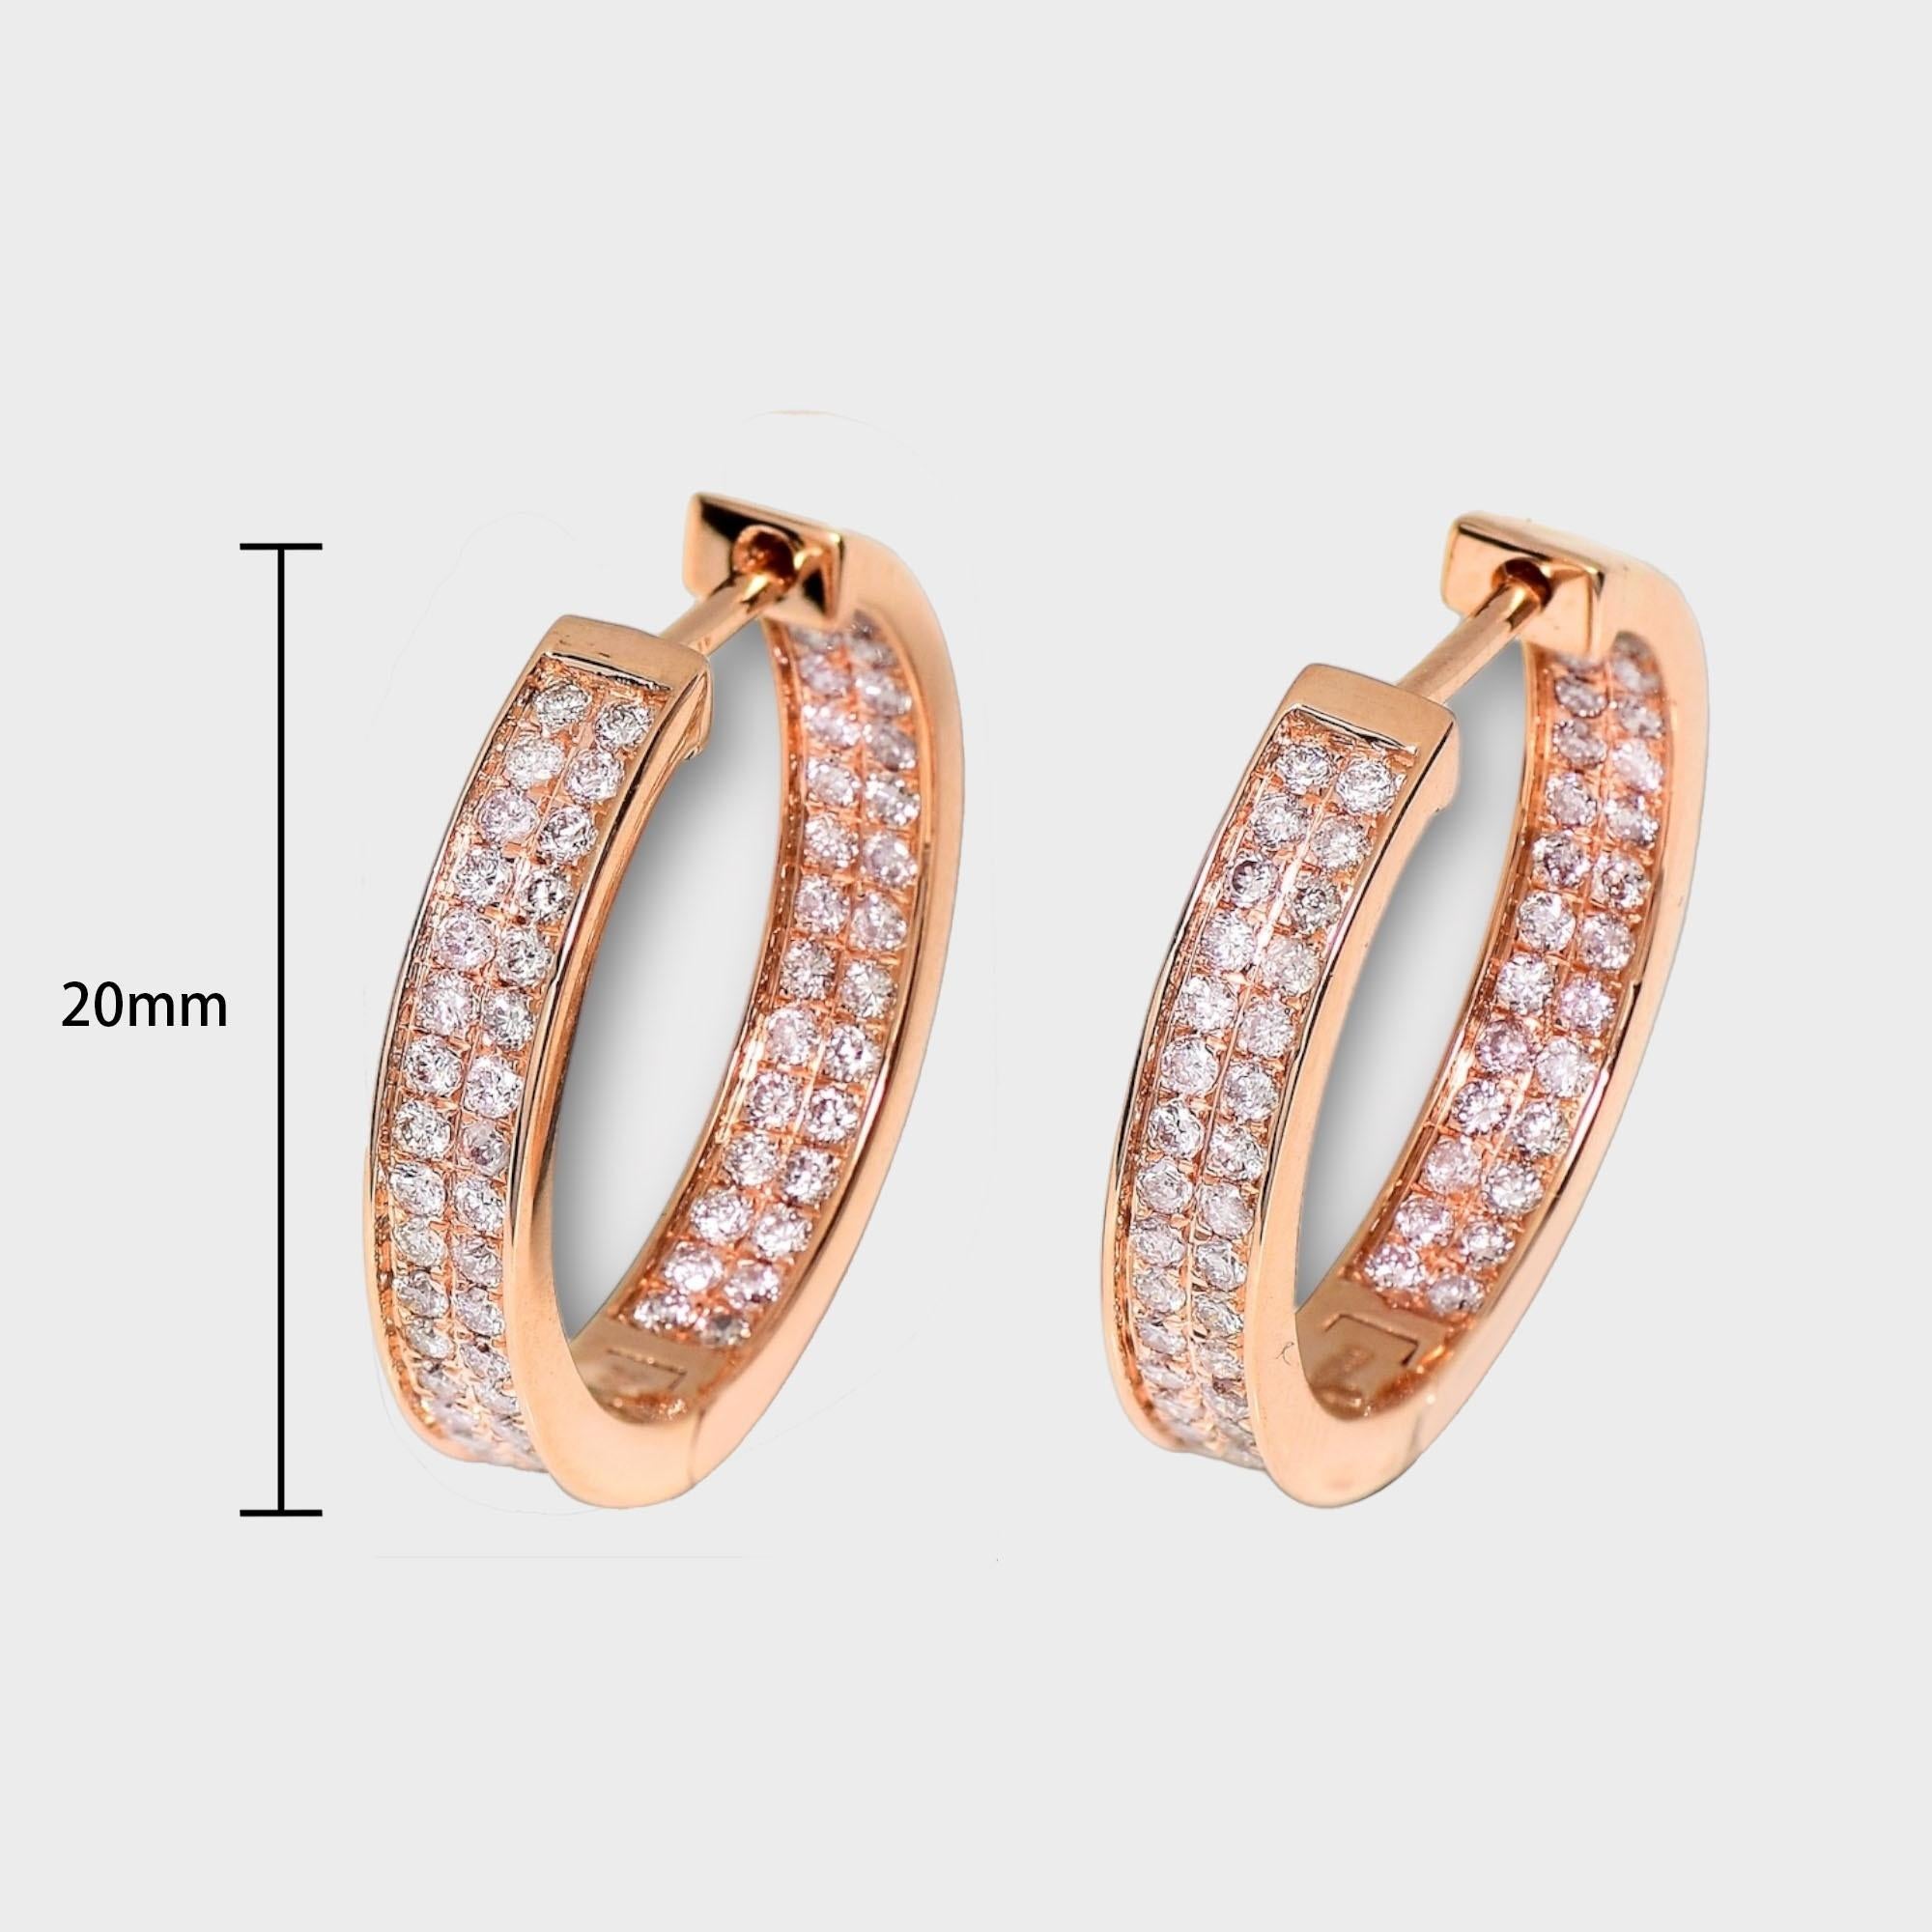 *IGI 14K 0.96 ct Natural Pink Diamonds Hoop Earrings*

This band features a stunning design with an art deco crafted from 14K rose gold. It is set with natural pink diamonds weighing 0.96 carats.

These earrings feature colorful natural diamonds and